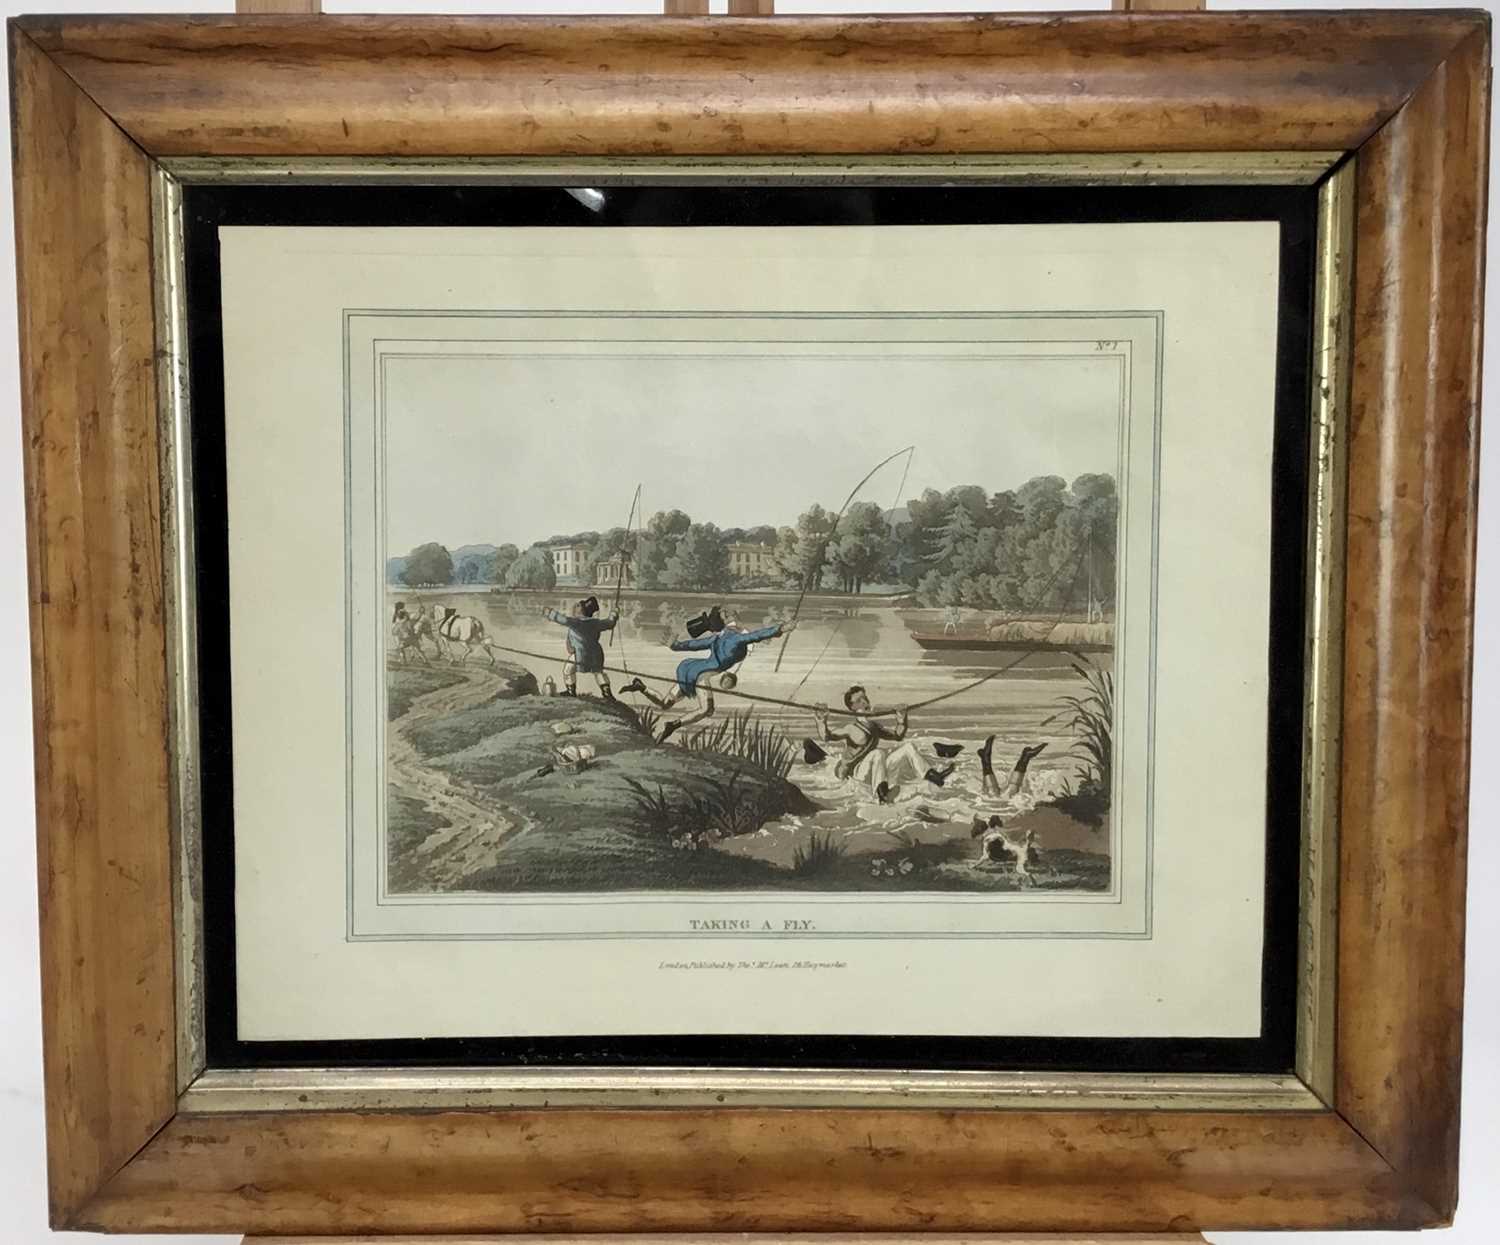 Lot 12 - Set of four early 19th century hand coloured engravings - four fishing scenes, pub. McLean in glazed maple frames, overall 38.5cm x 33cm